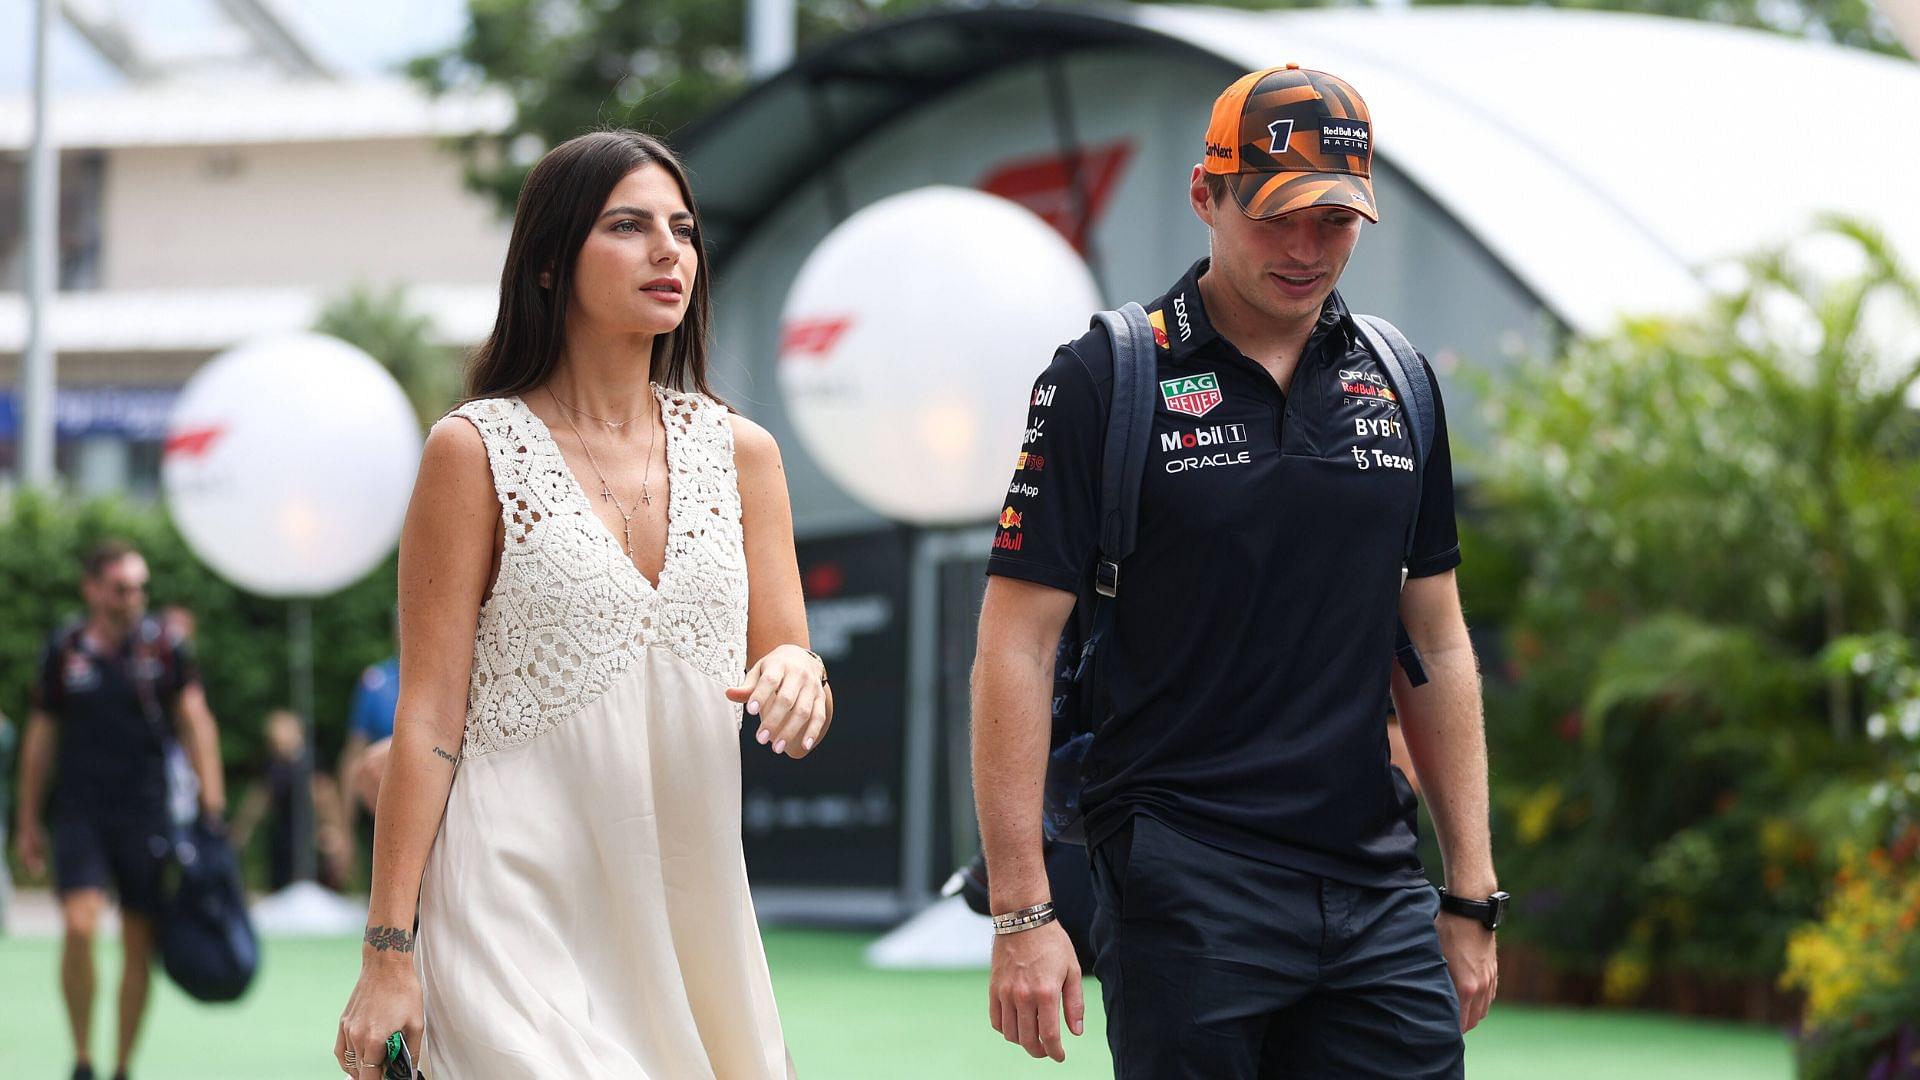 A Valentine's Day Gift From Kelly Piquet to Max Verstappen Has a Chokehold on F1 Fans